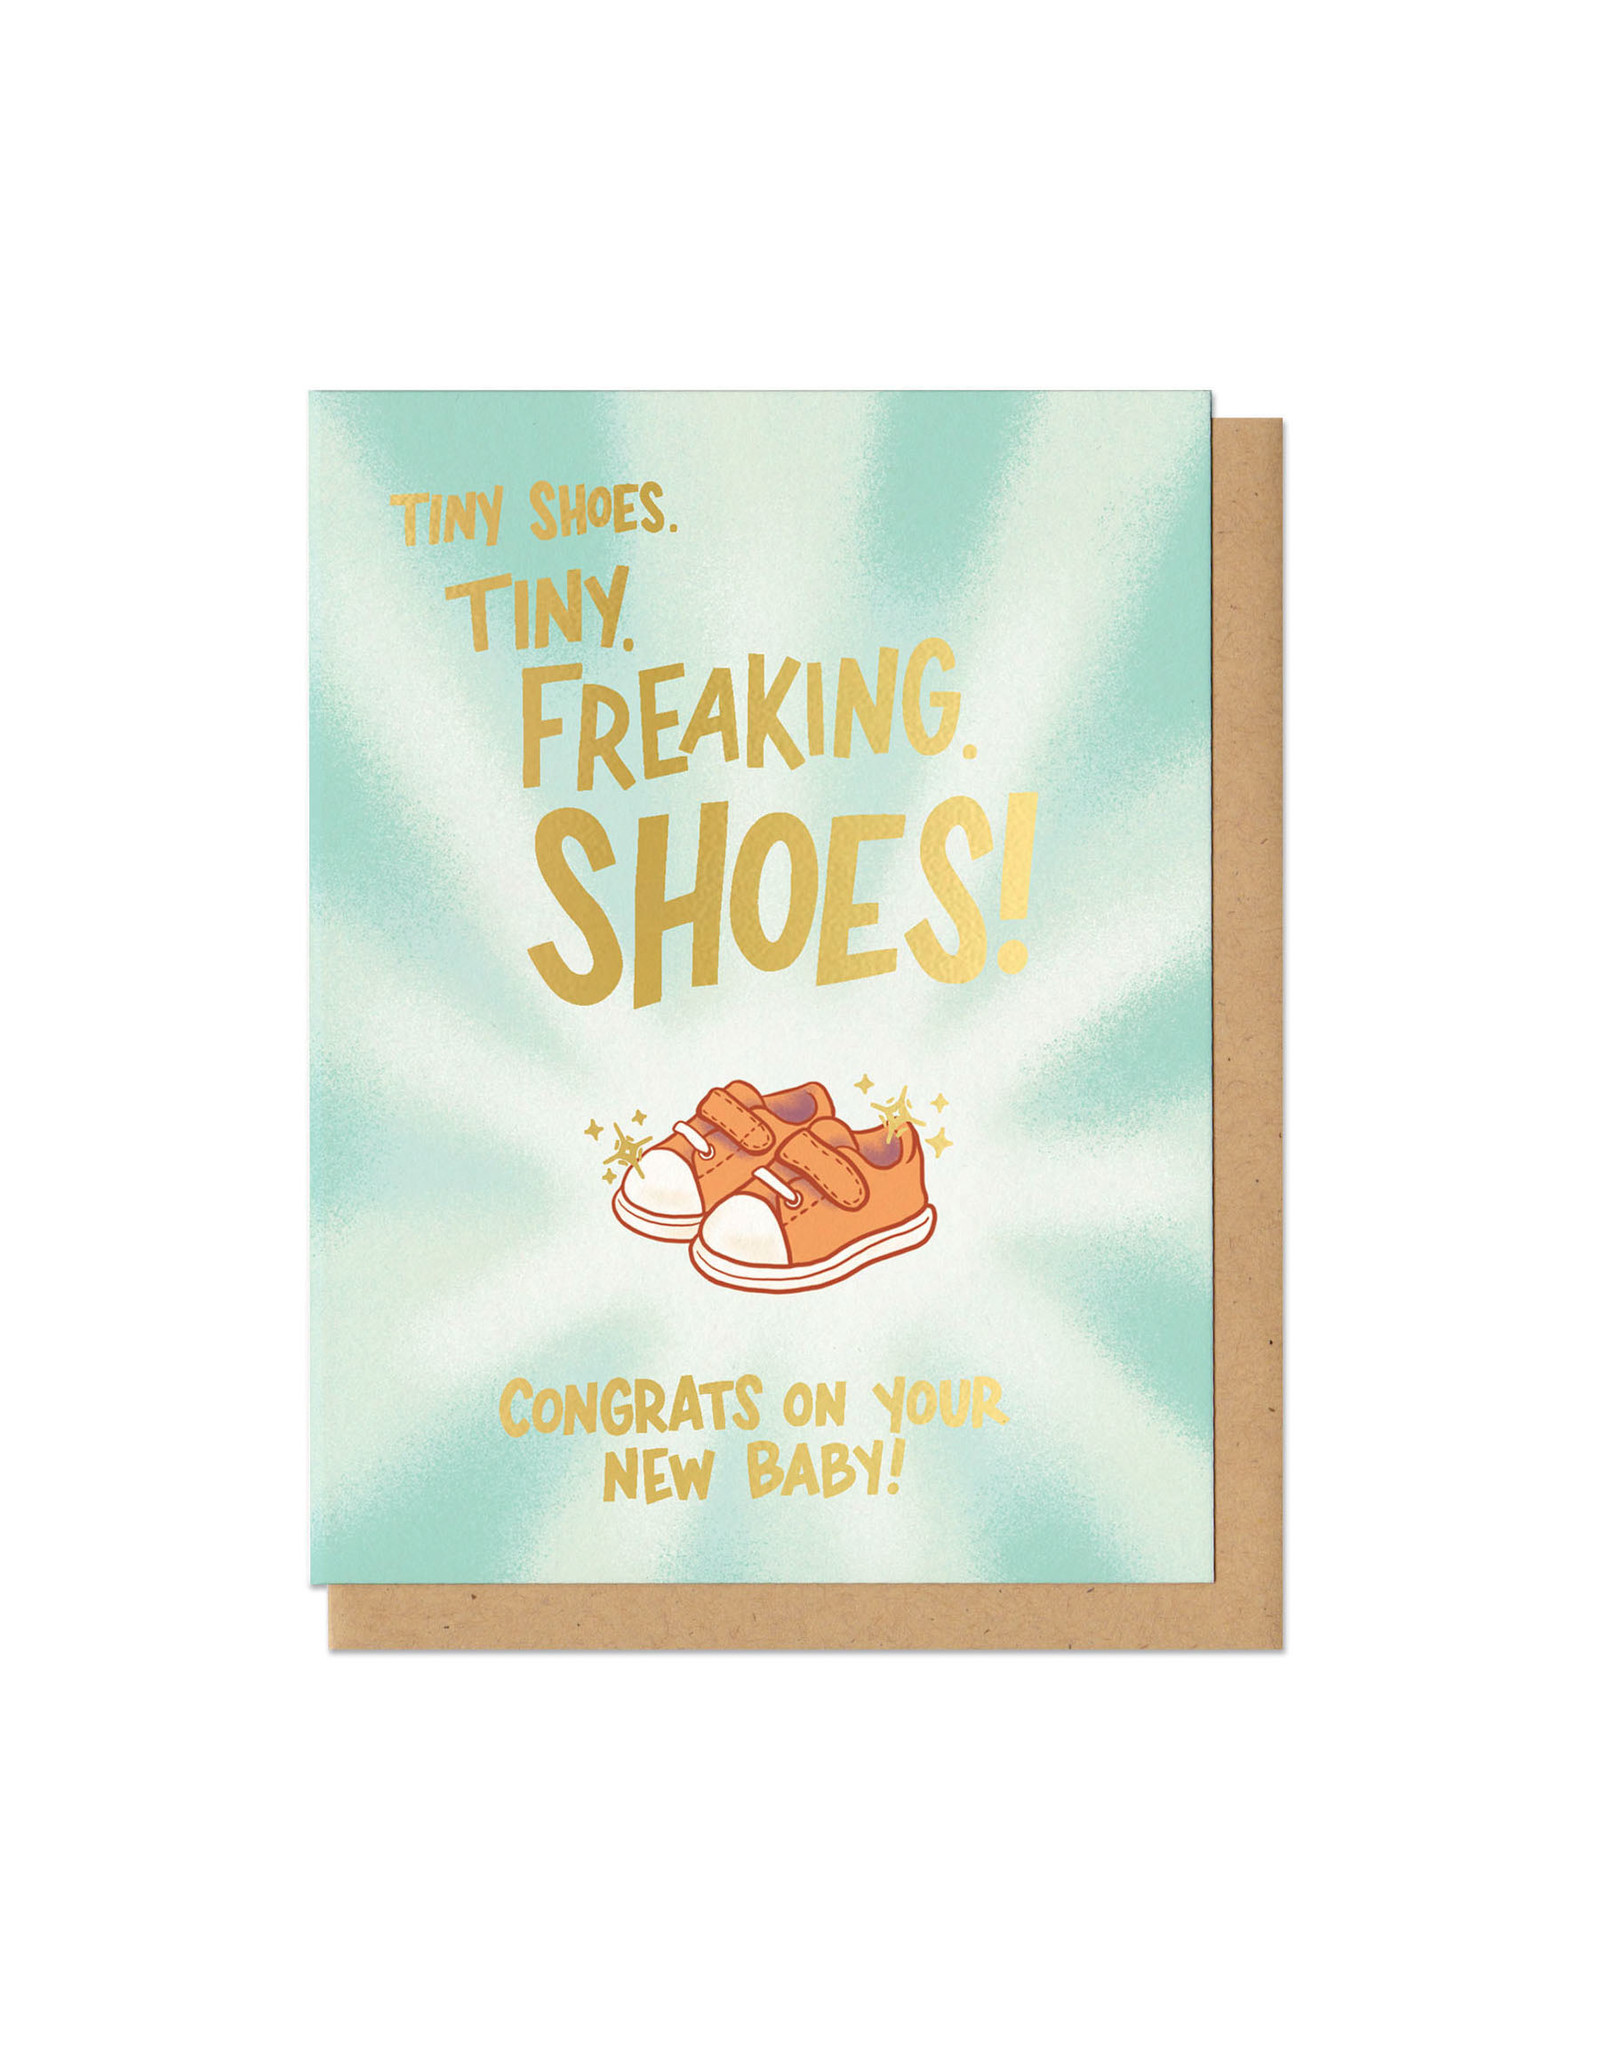 Tiny Freaking Shoes Greeting Card